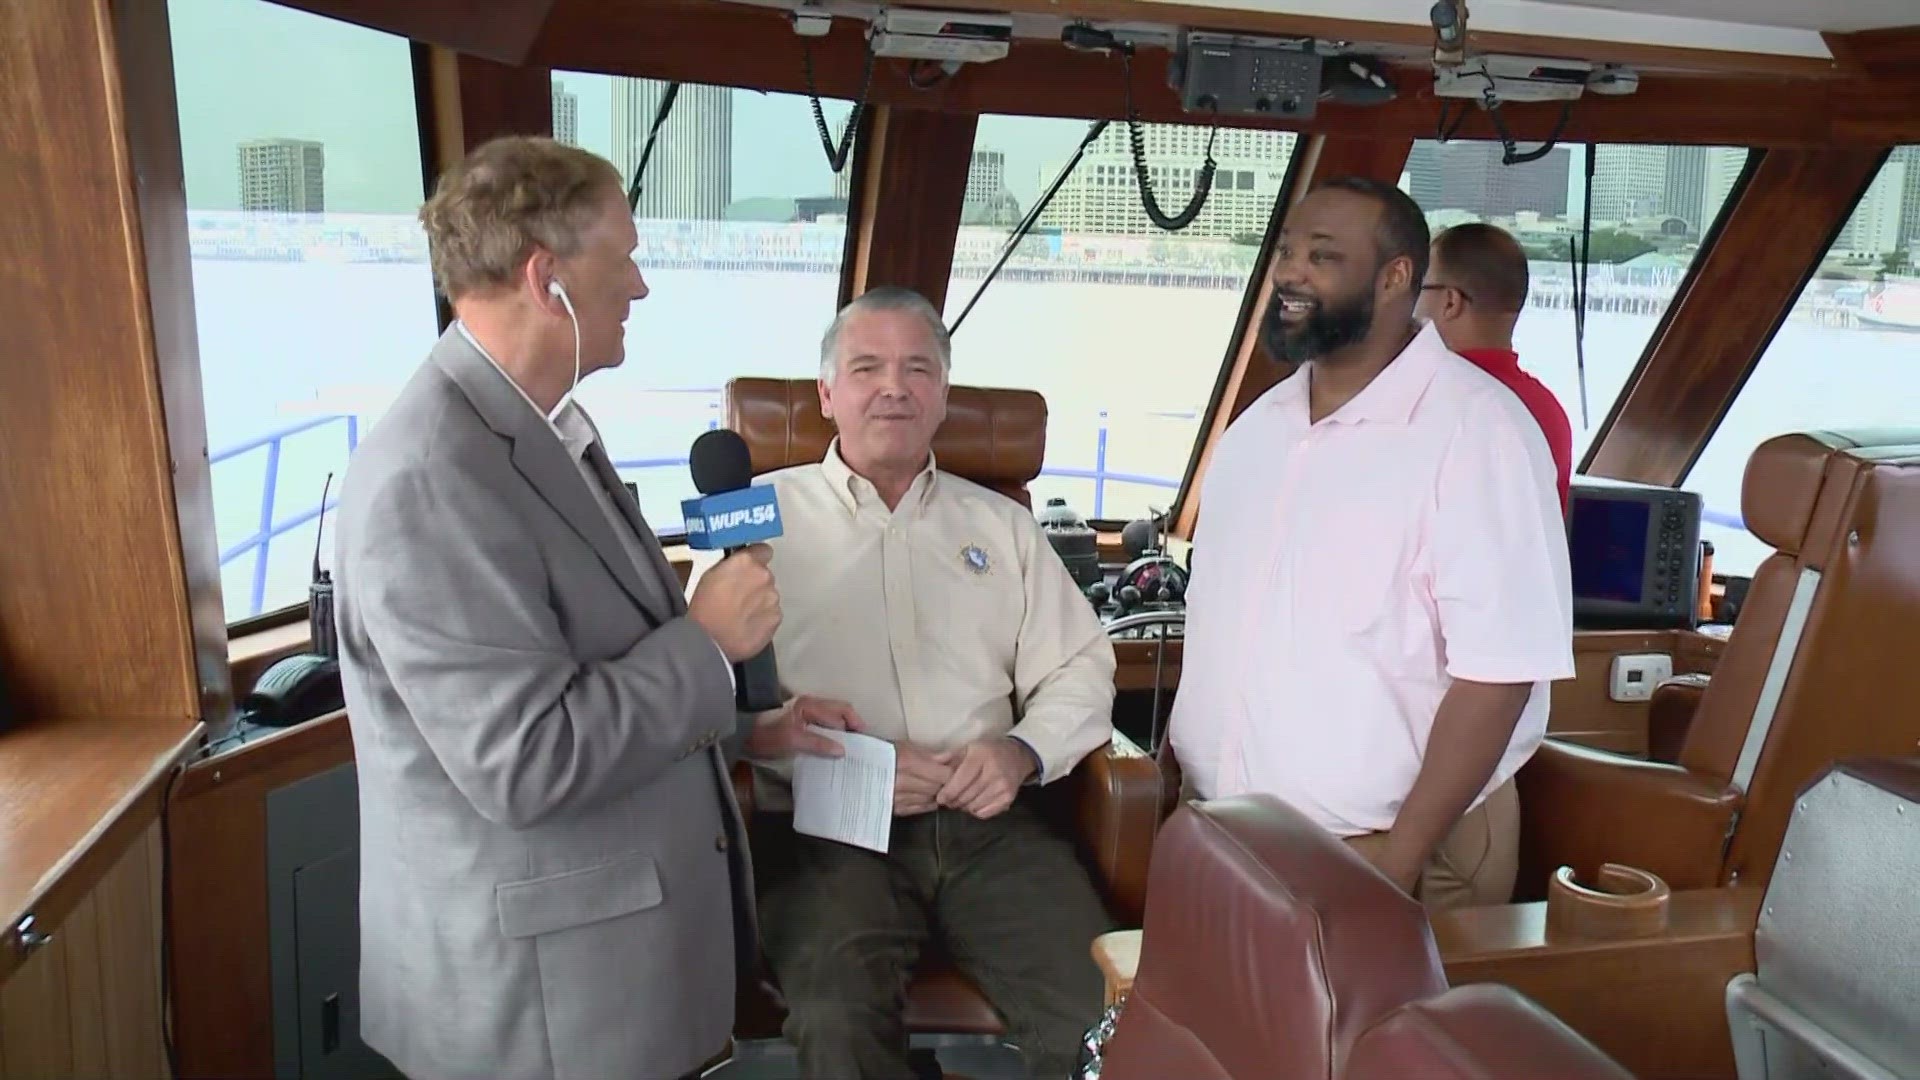 Talking with riverboat pilots for Maritime Day.